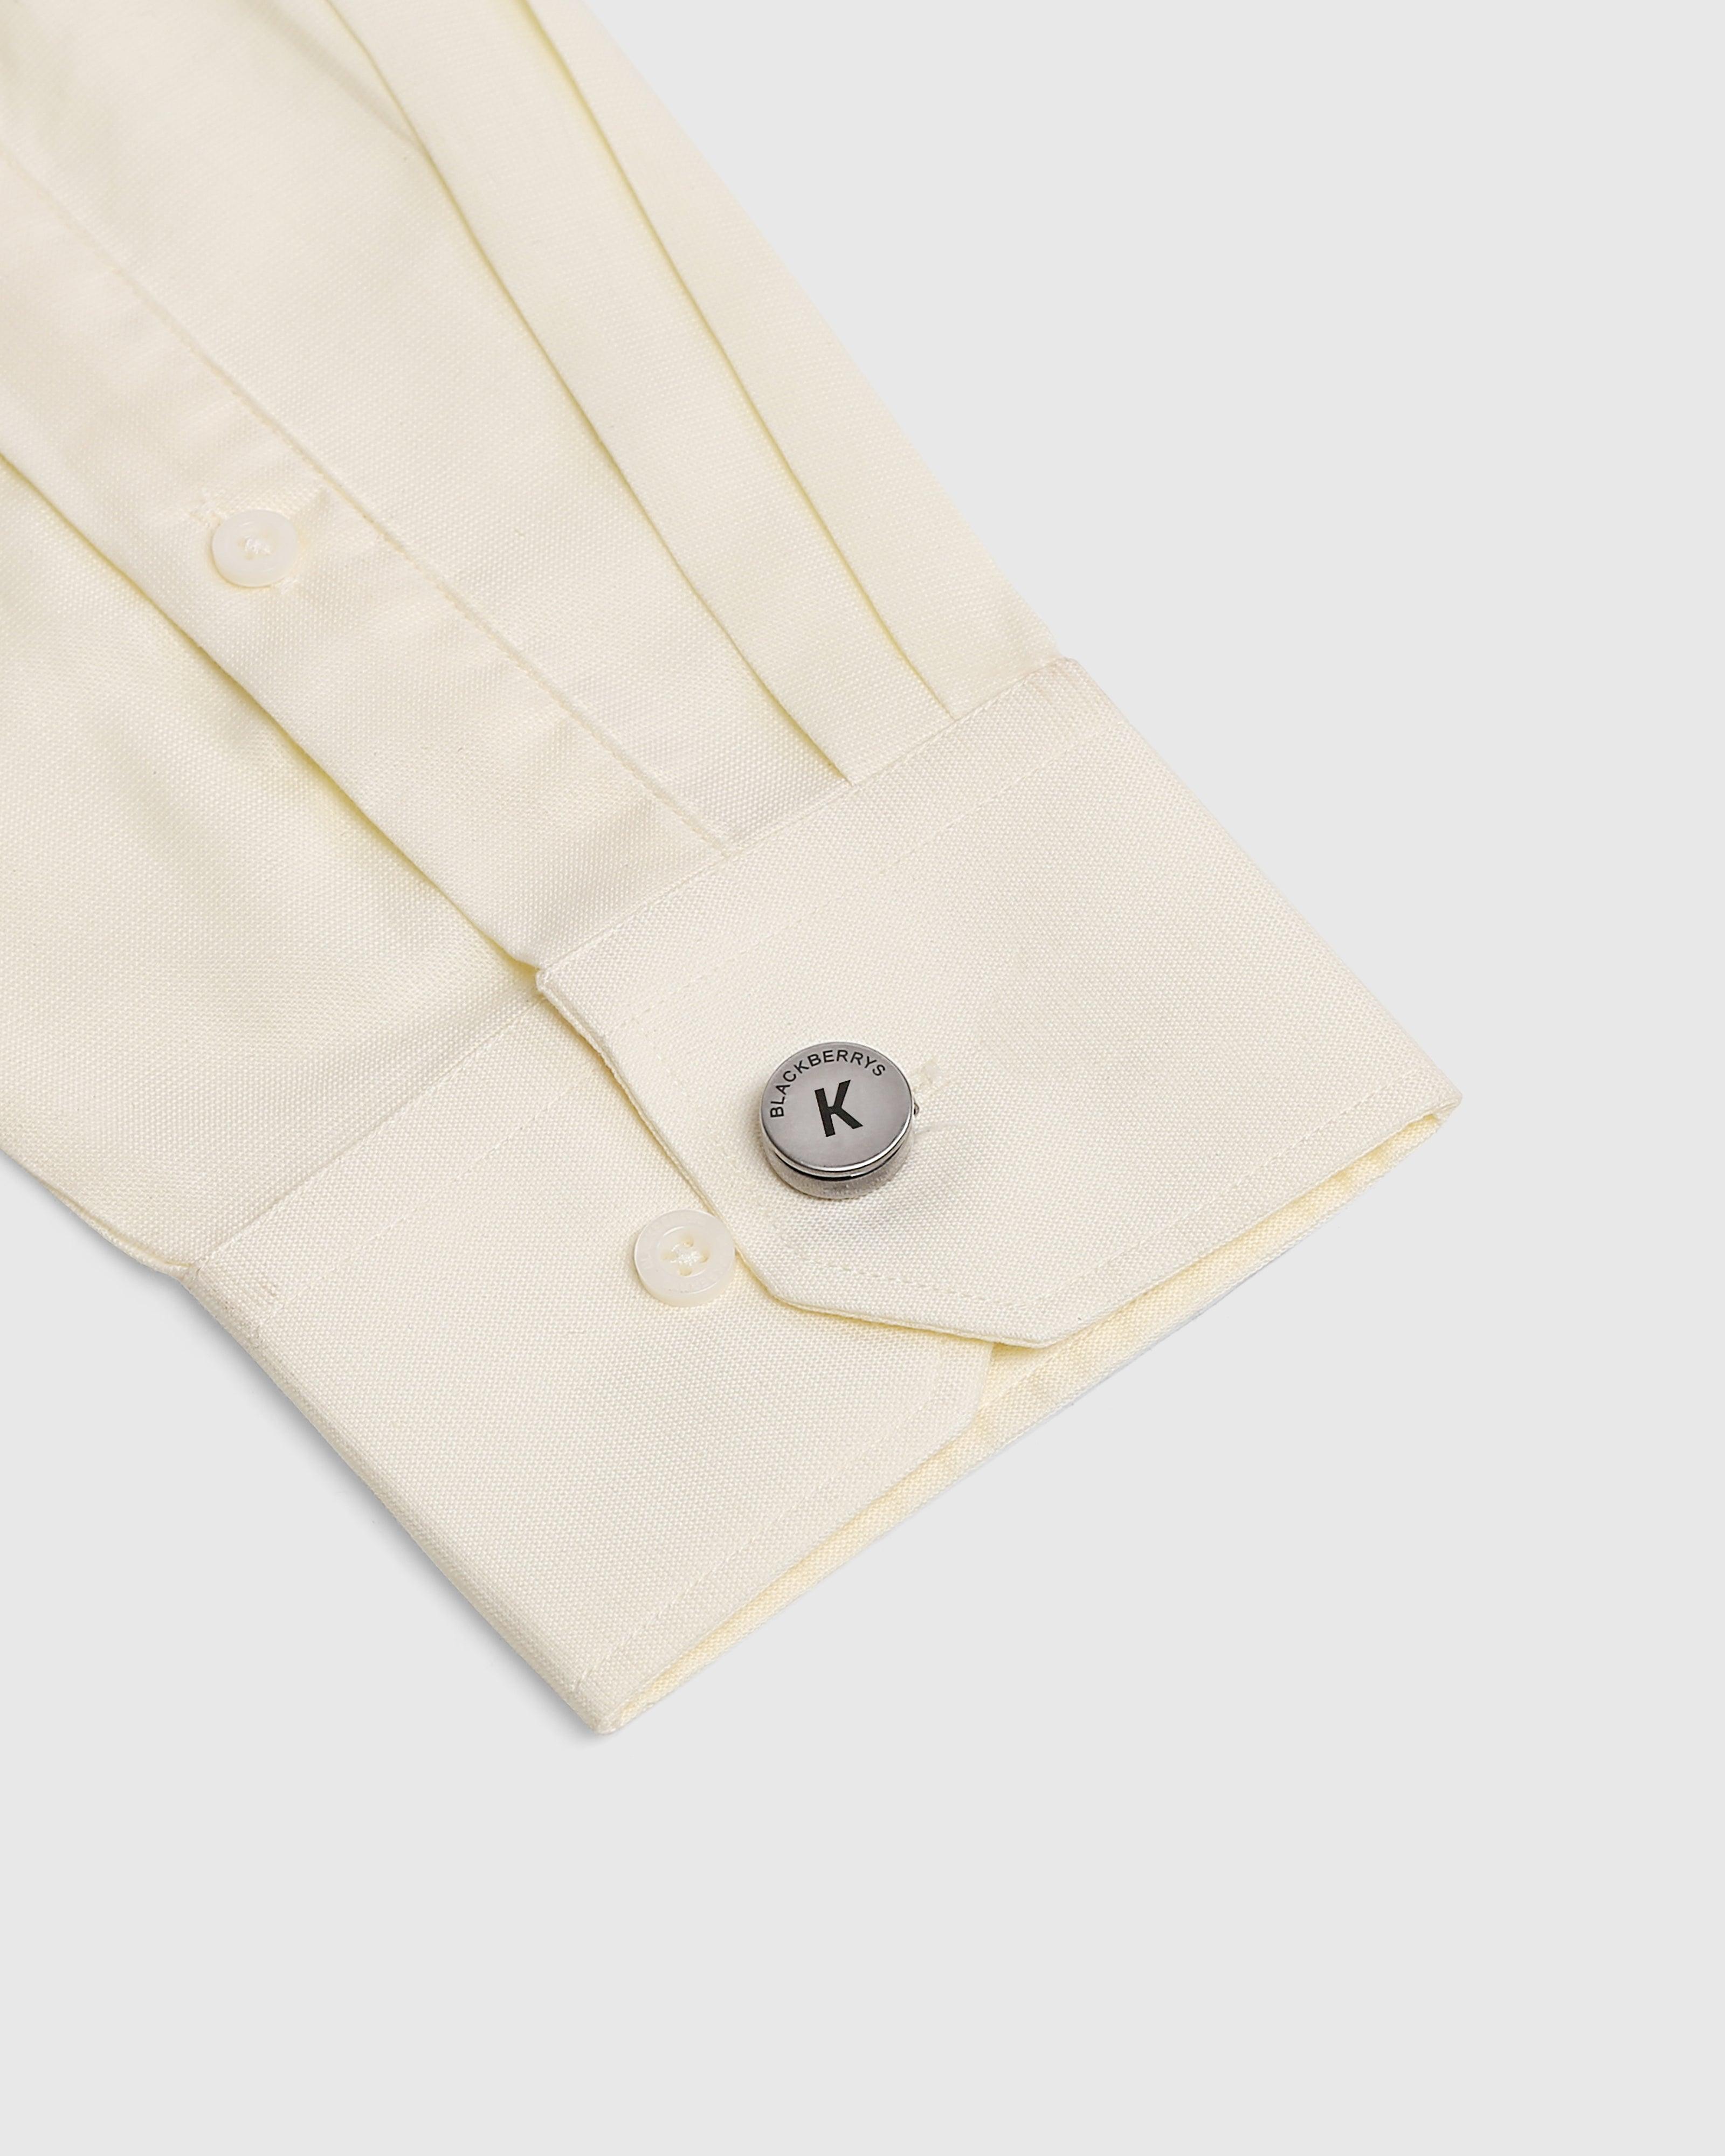 Personalised Shirt Button Cover With Alphabetic Initial-K